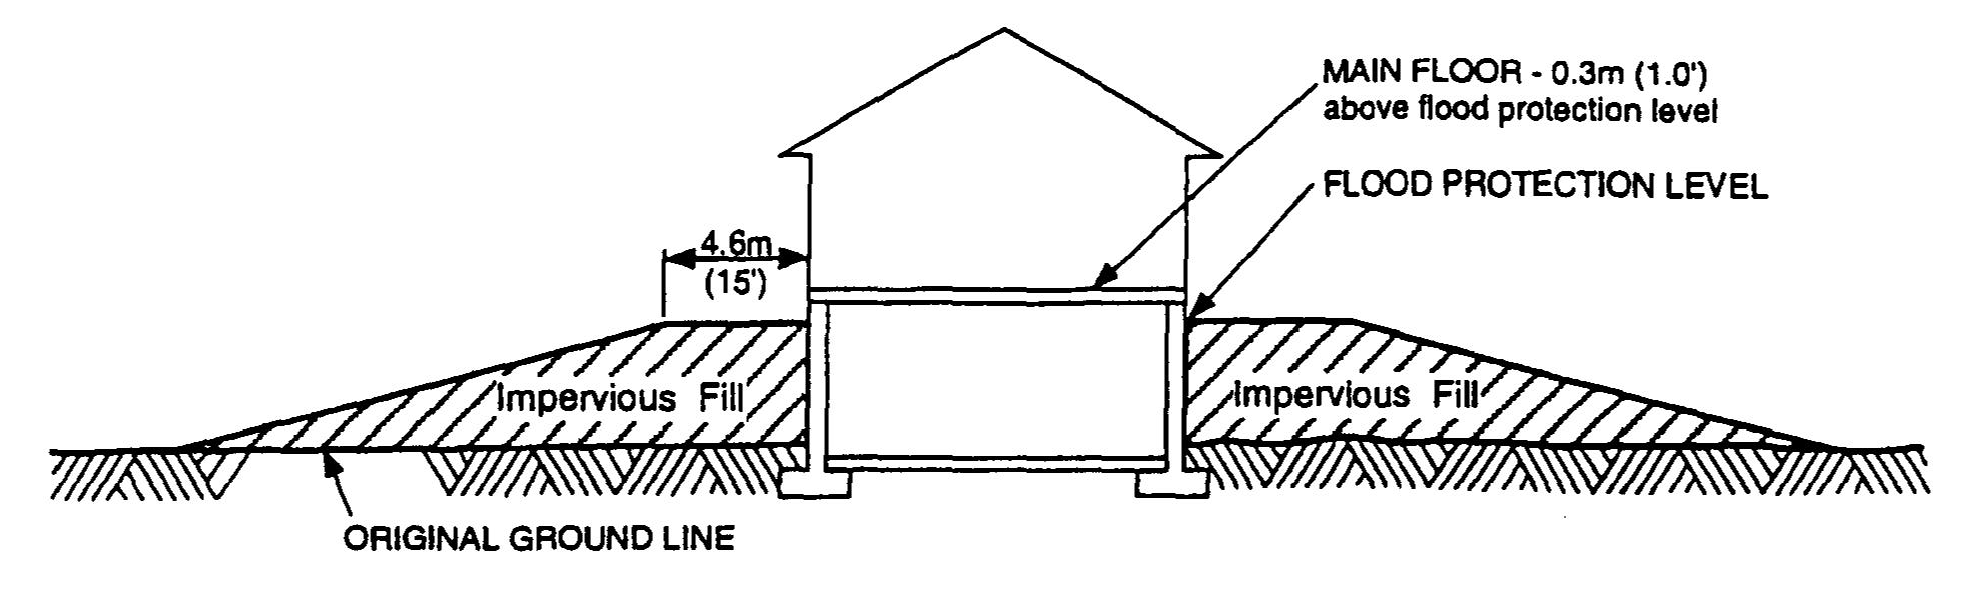 Structures with a basement or cellar elevations